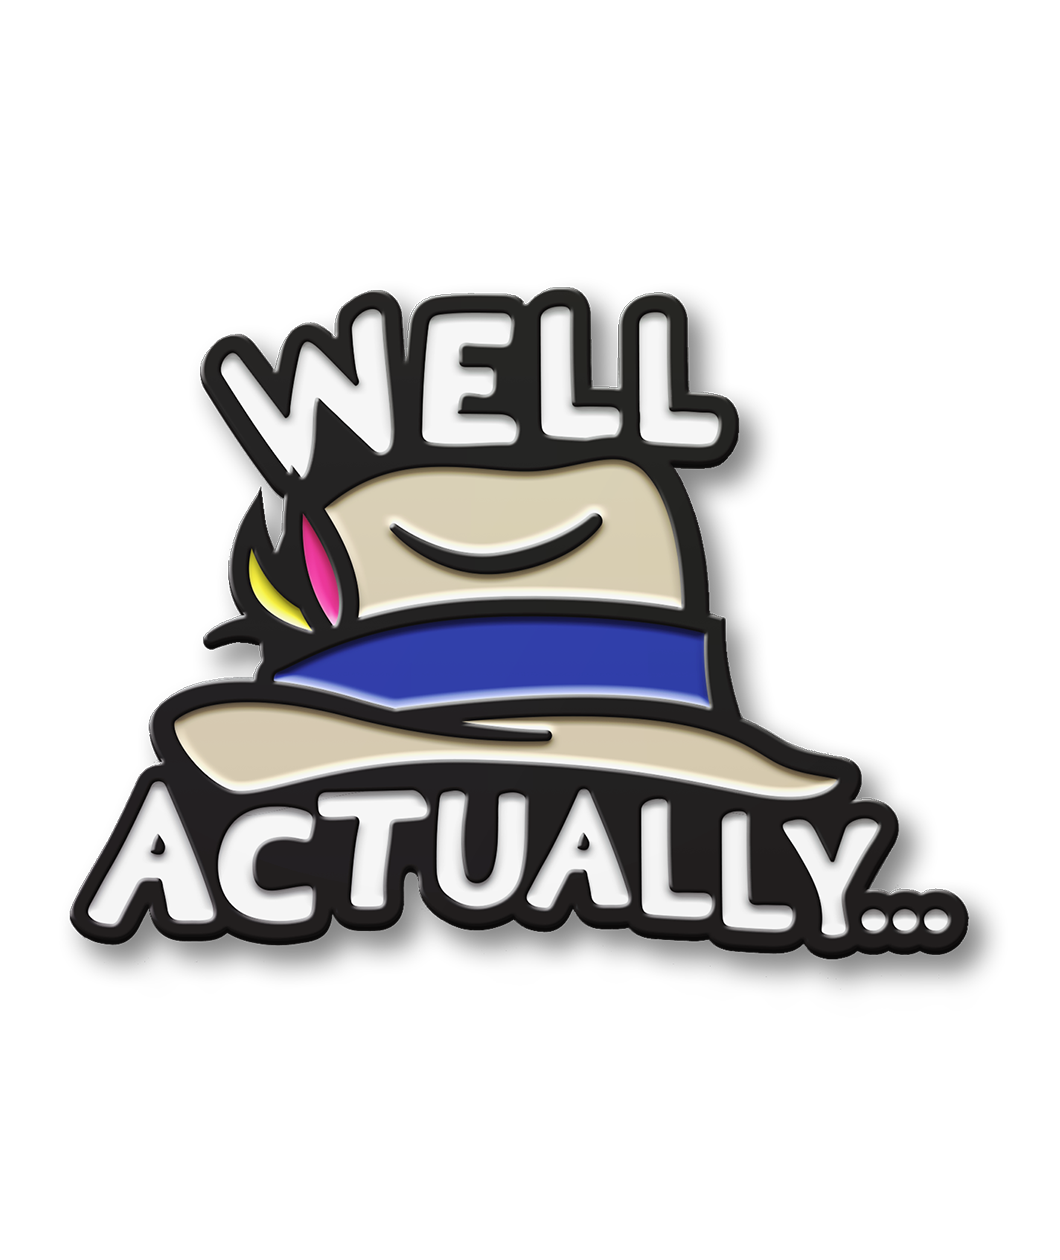 Black plated enamel pin of a khaki fedora with blue band and pink and yellow feathers. Words WELL on top and ACTUALLY... in white below the fedora.